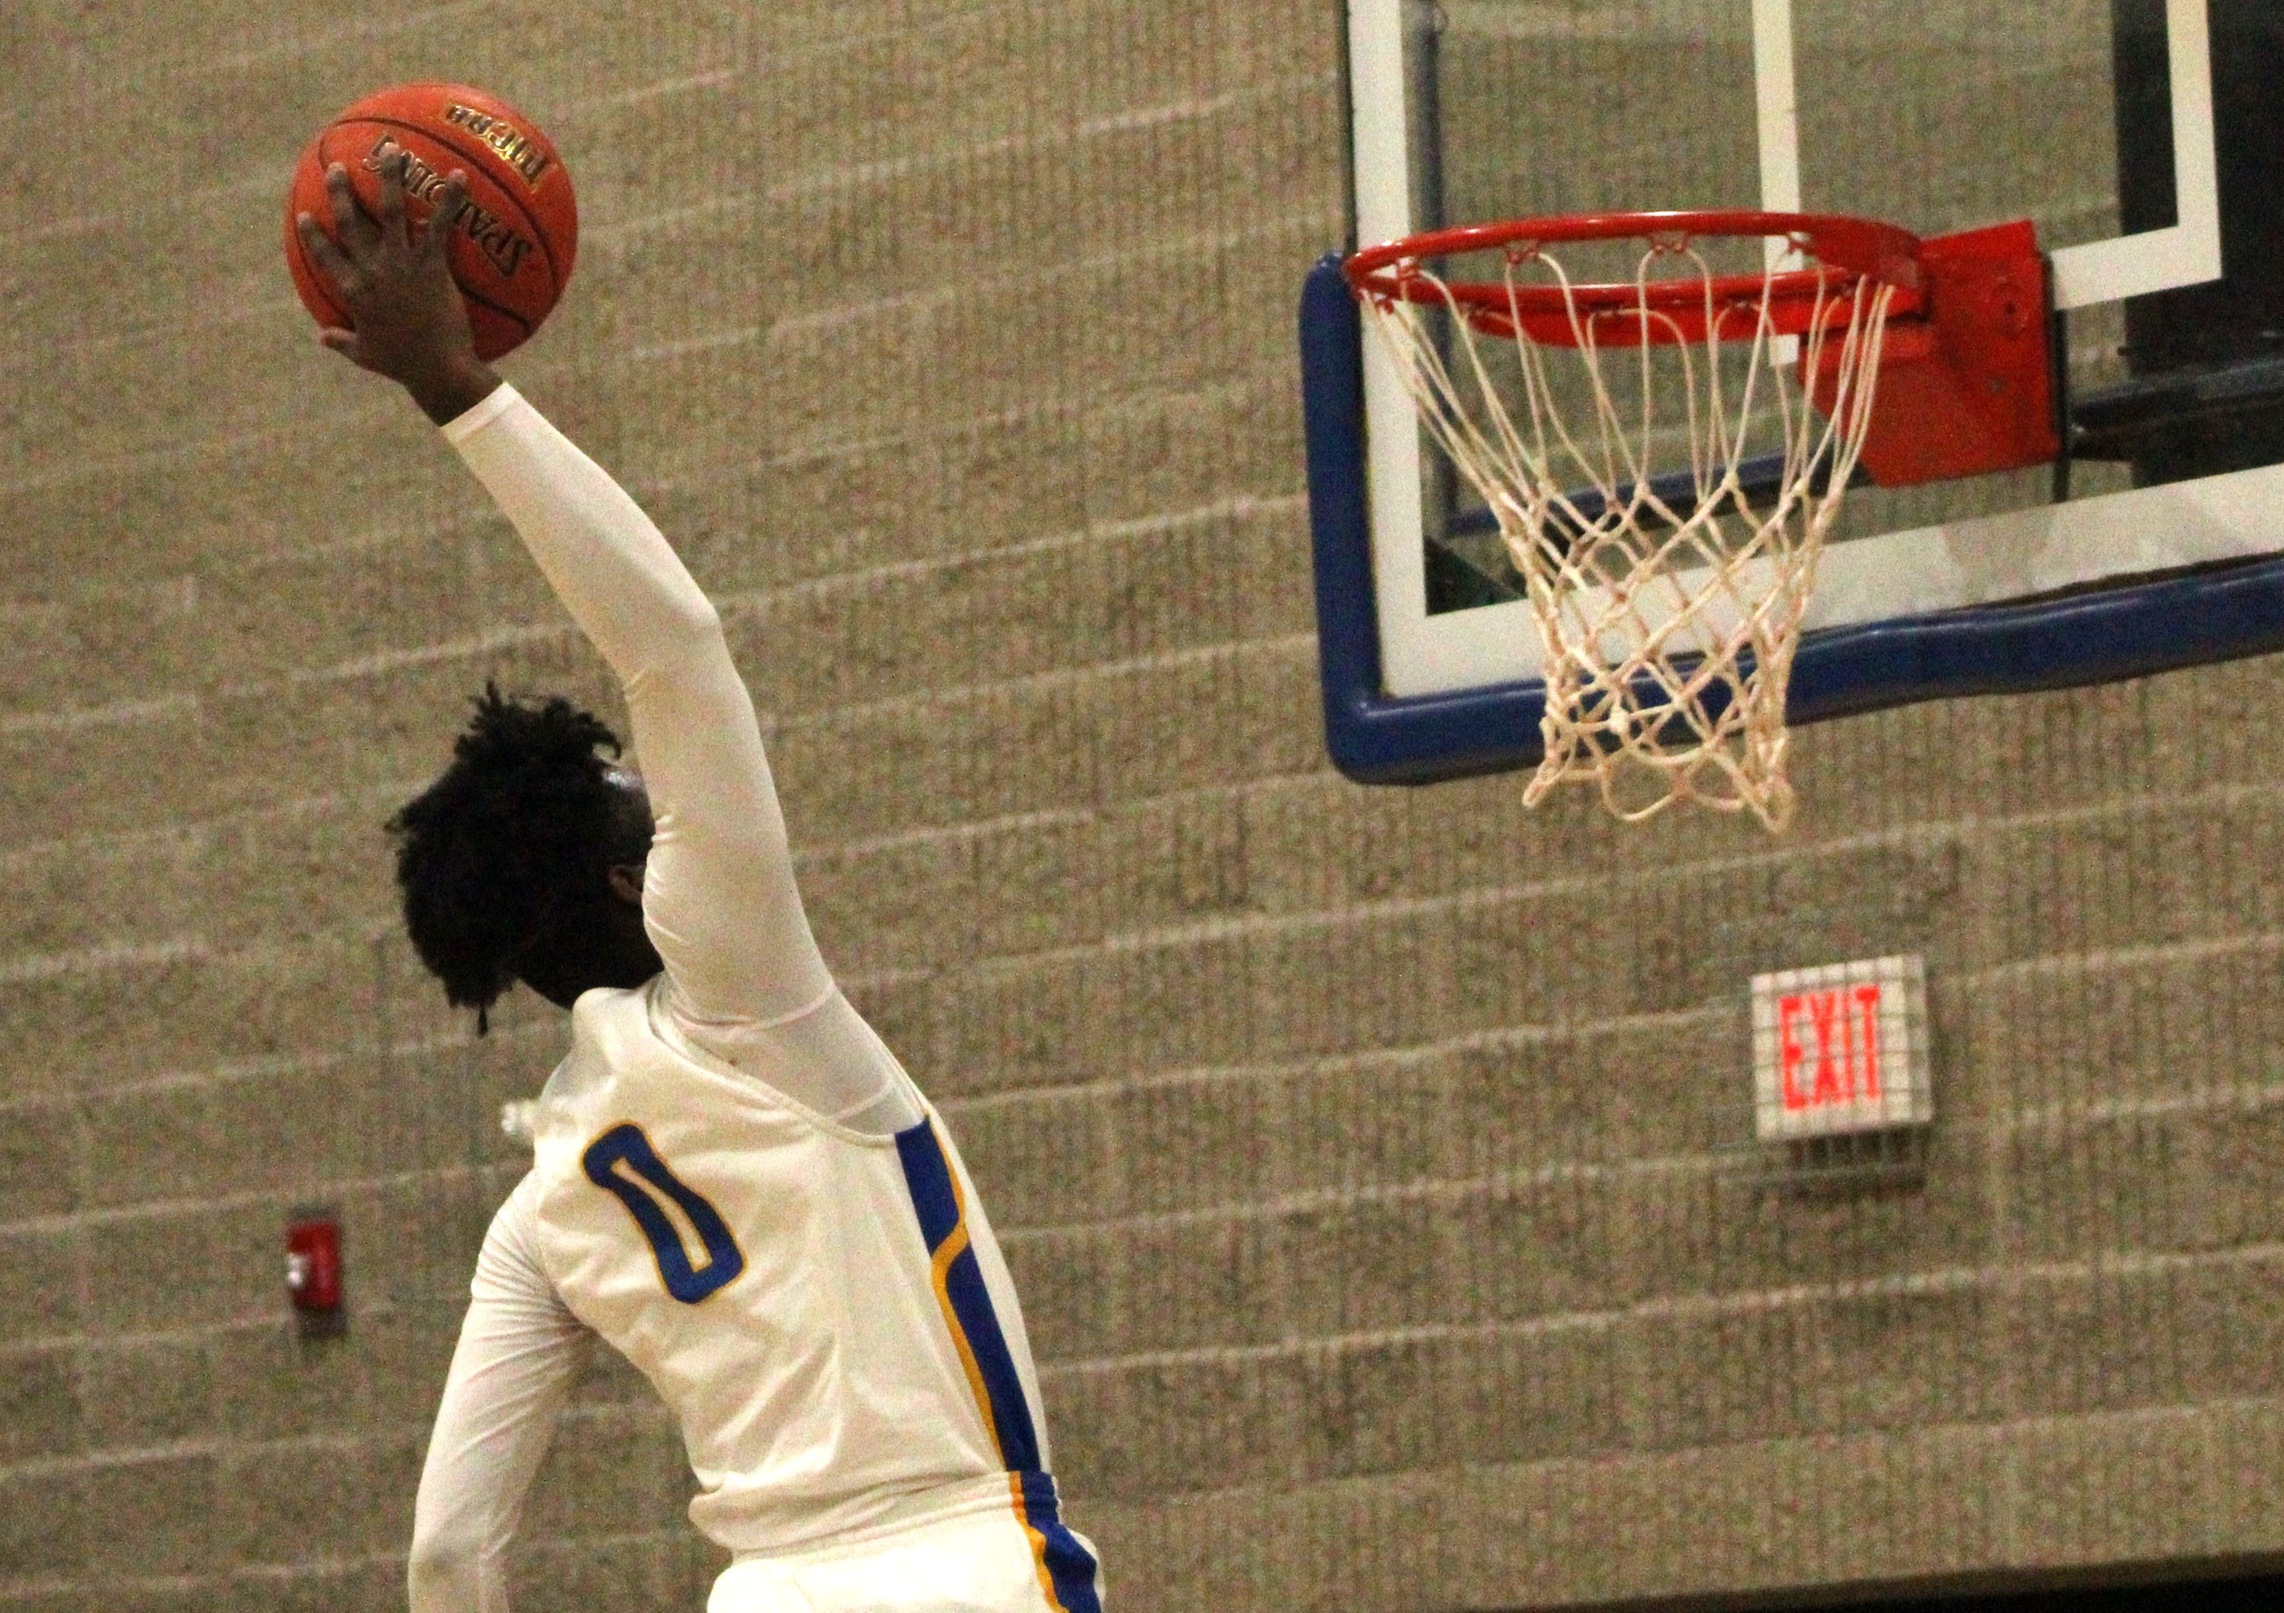 NIACC's Myles Tucker slams home two points in Monday's win over the Mount Mercy JV in the NIACC gym.